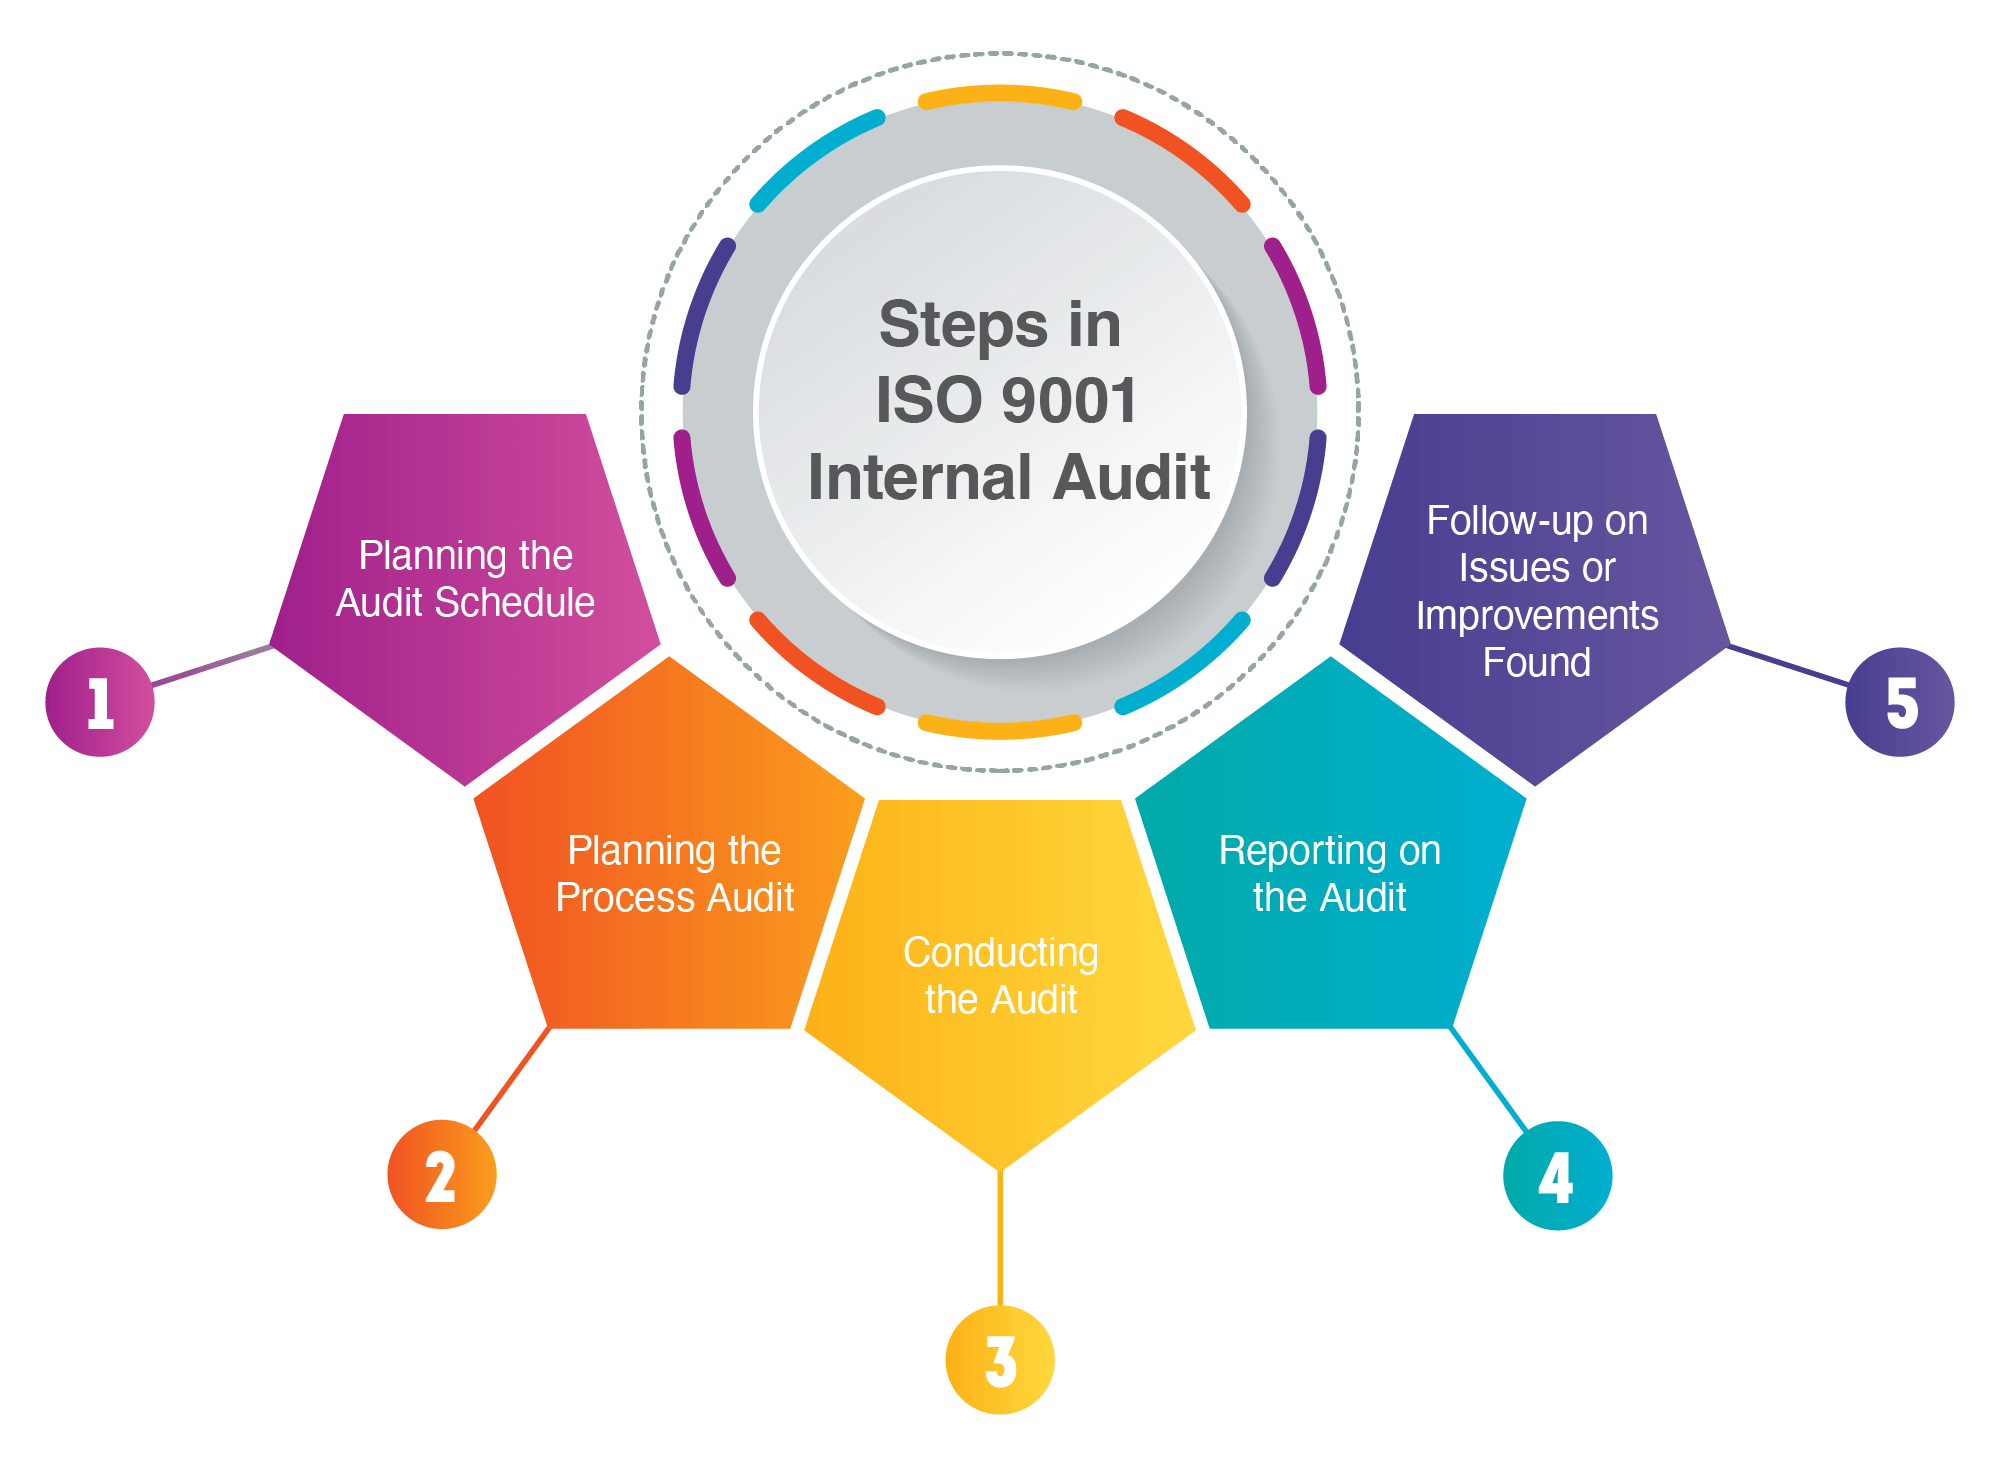 ISO 9001 Internal Audit: Five main steps to make it more effective